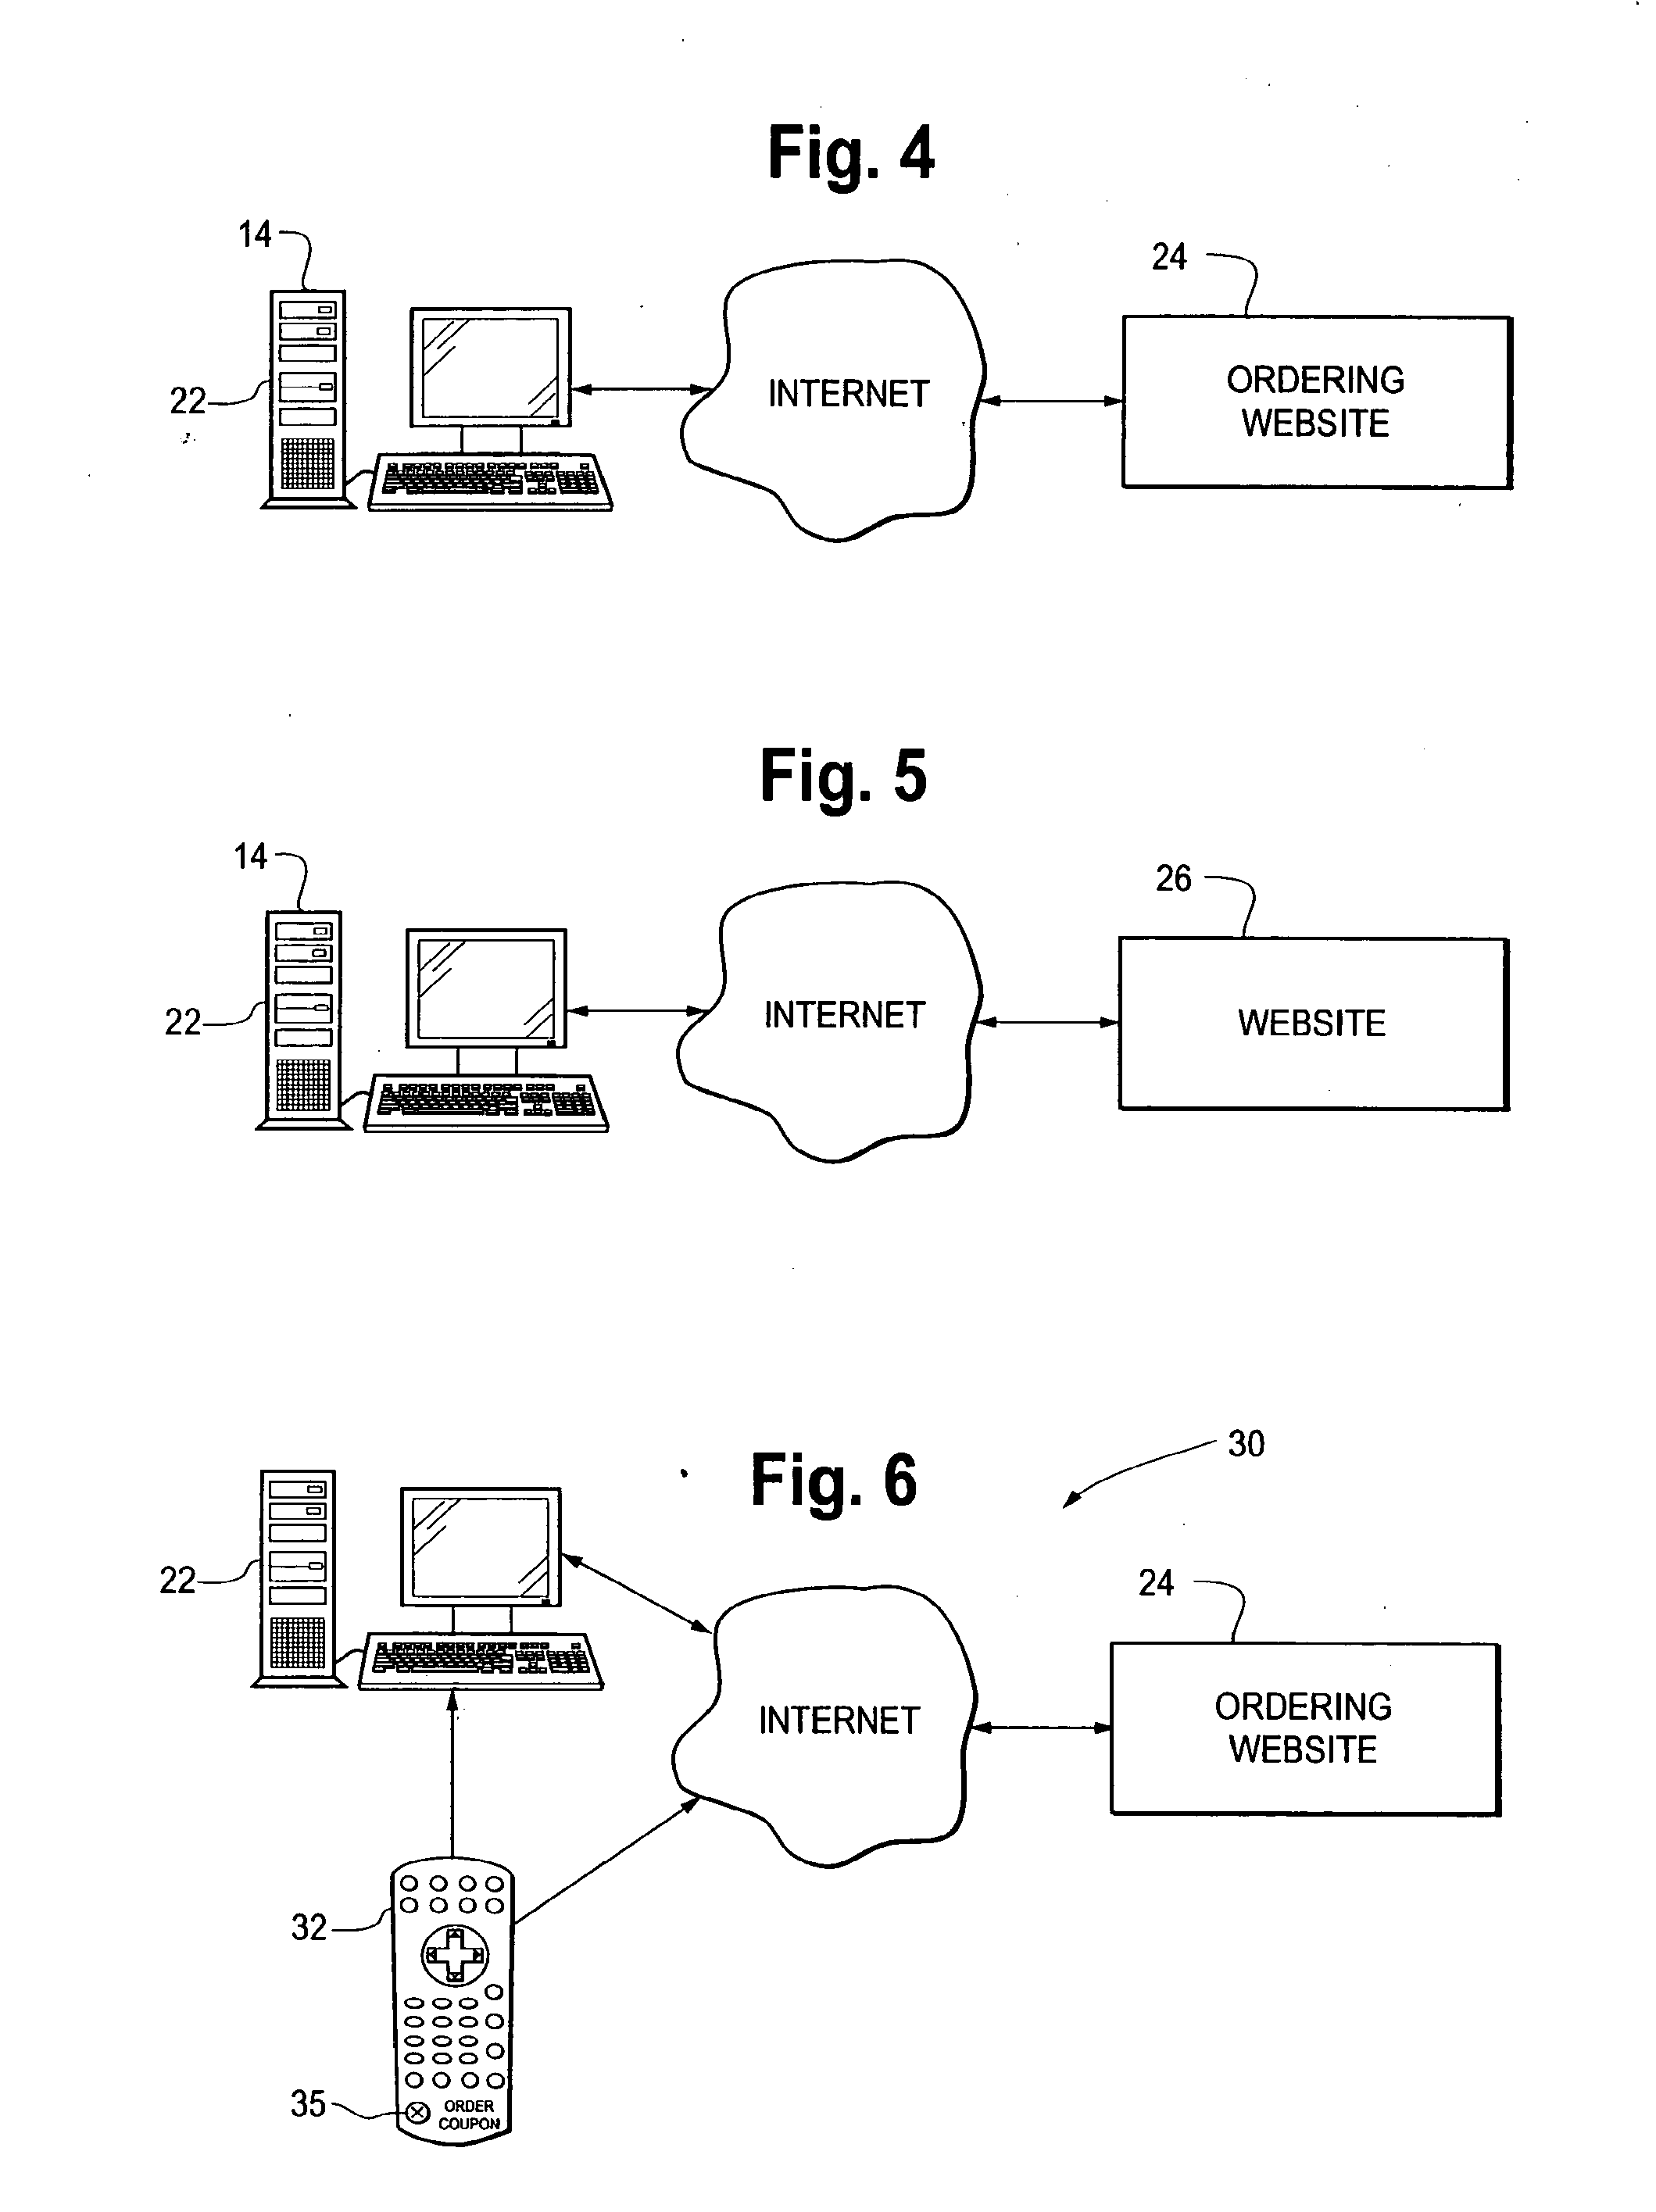 Systems and methods for the identification and/or distribution of music and other forms of useful information